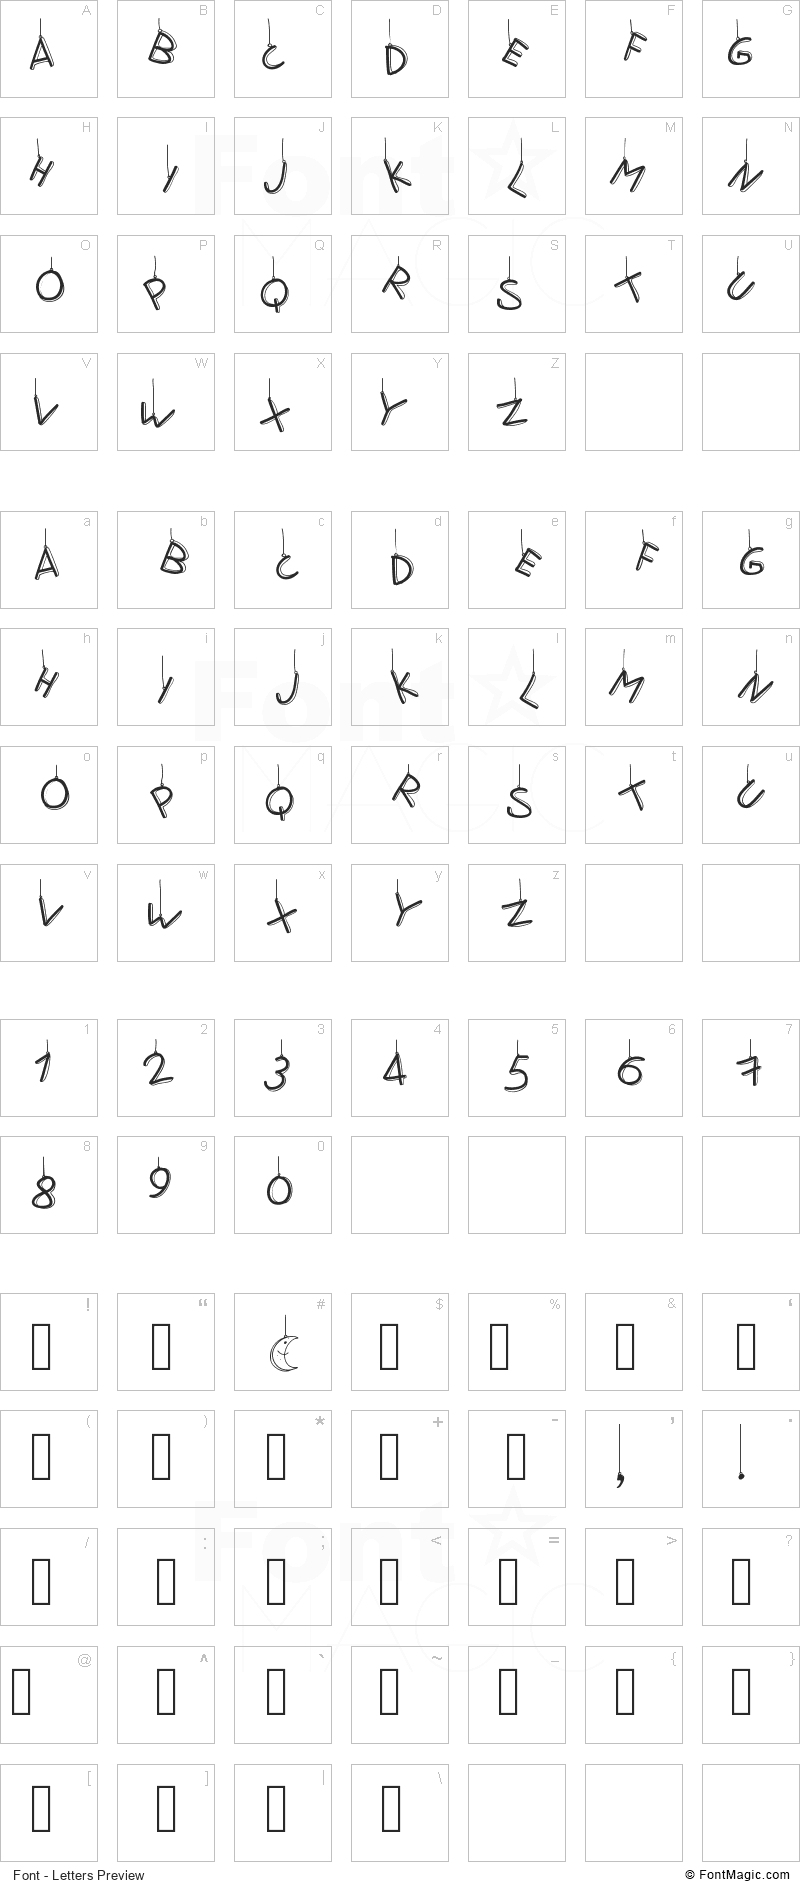 PW Fly me to the moon Font - All Latters Preview Chart